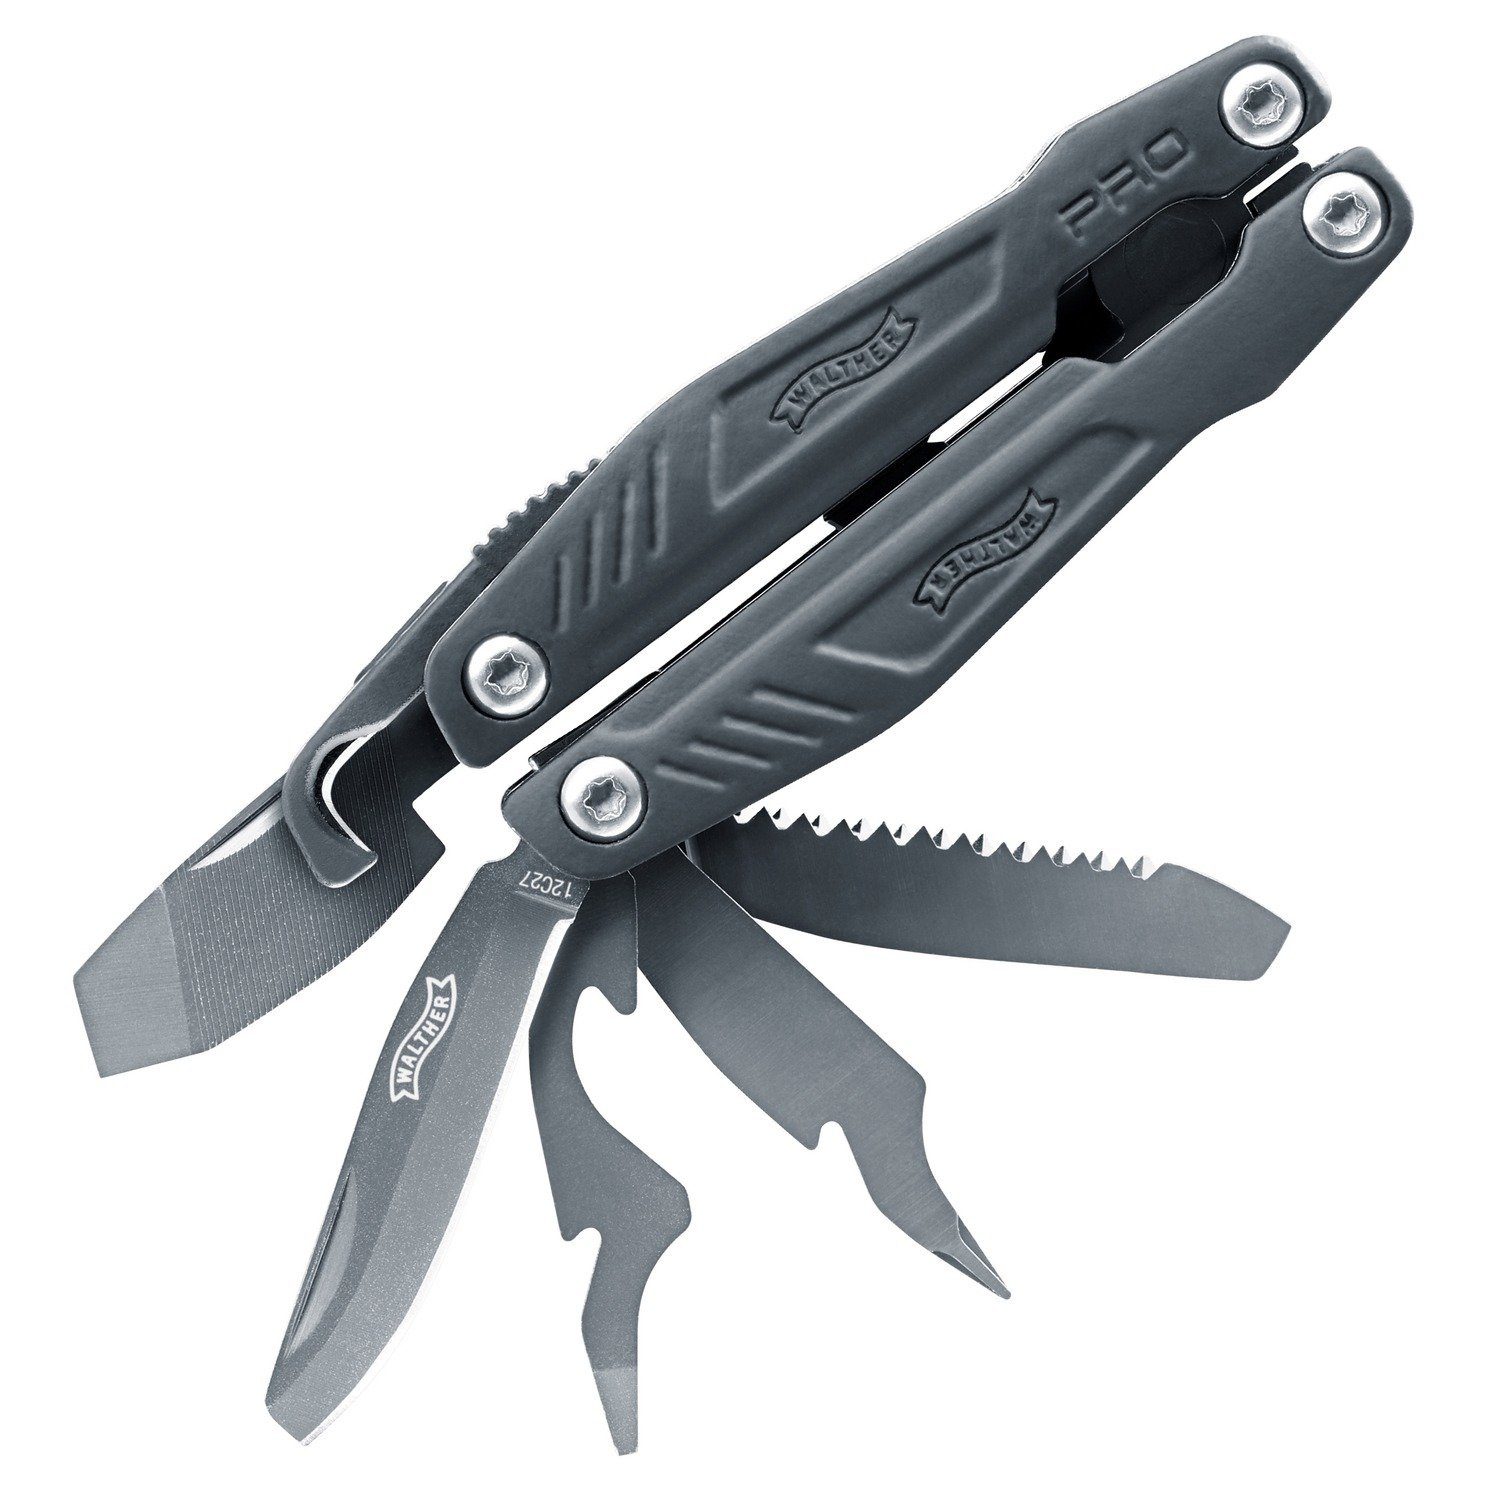 Pro Tooltac Multitool Multitool S Walther